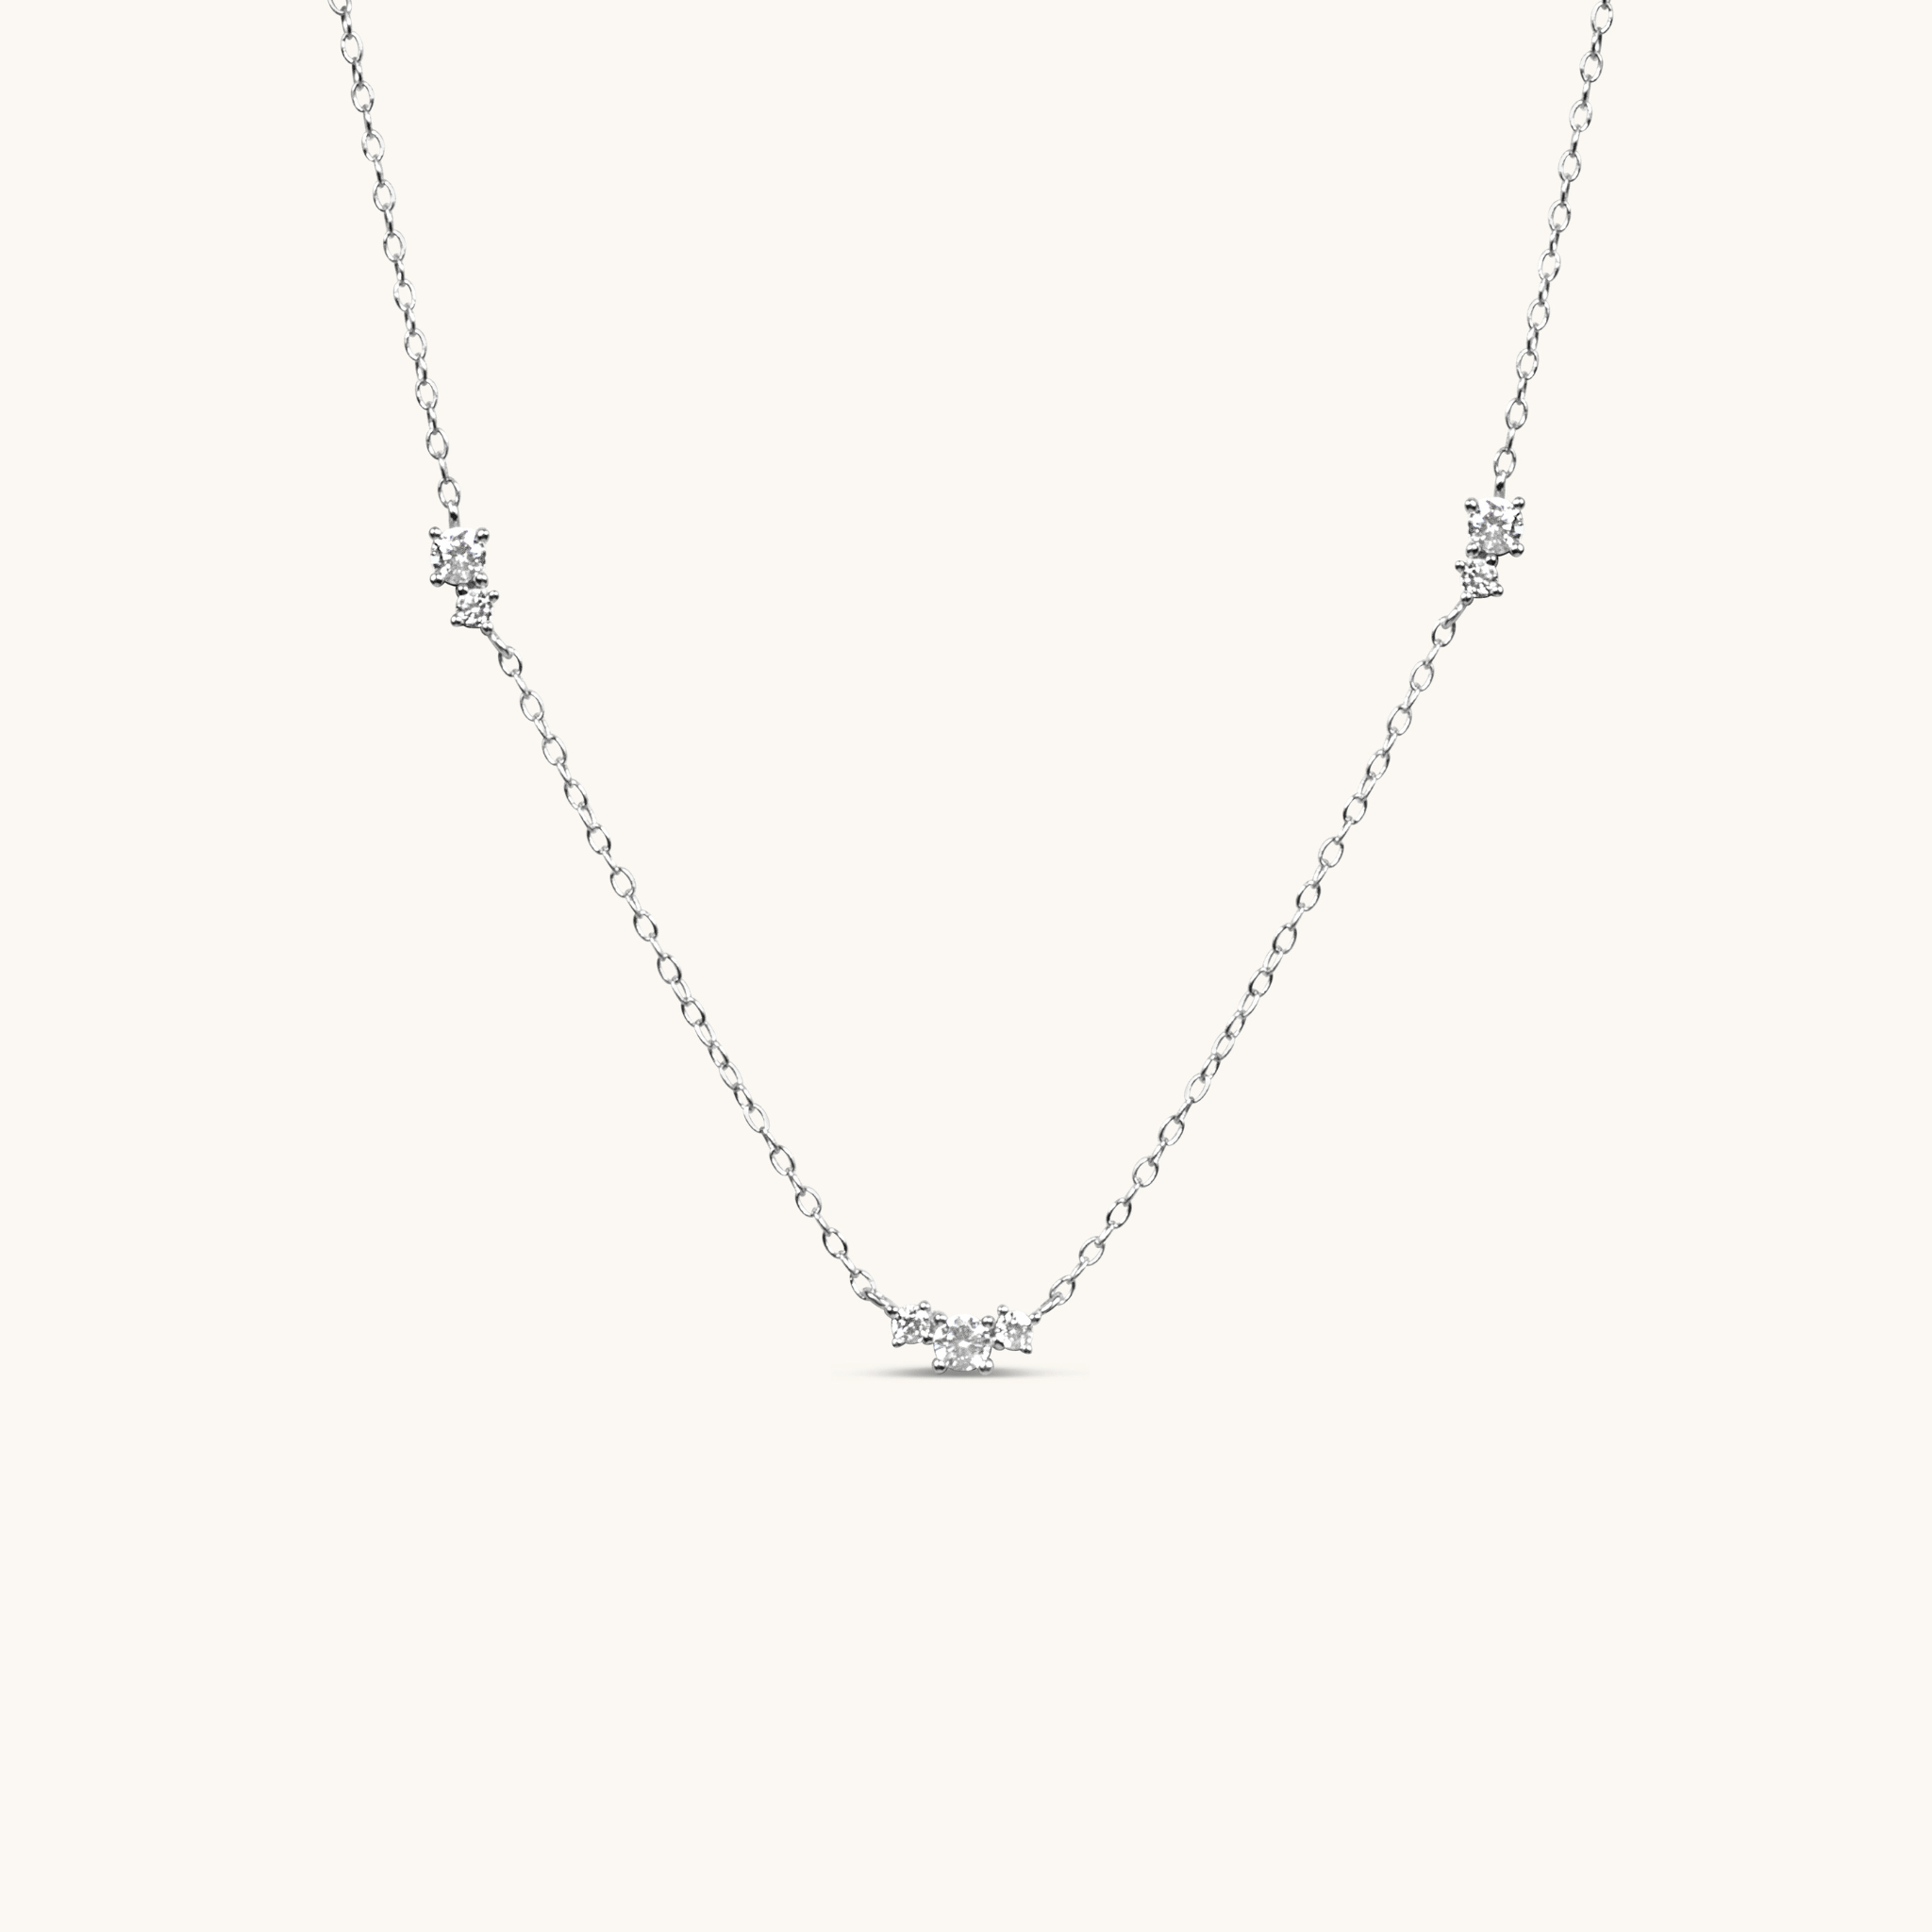 Silver floating cubic zirconia necklace